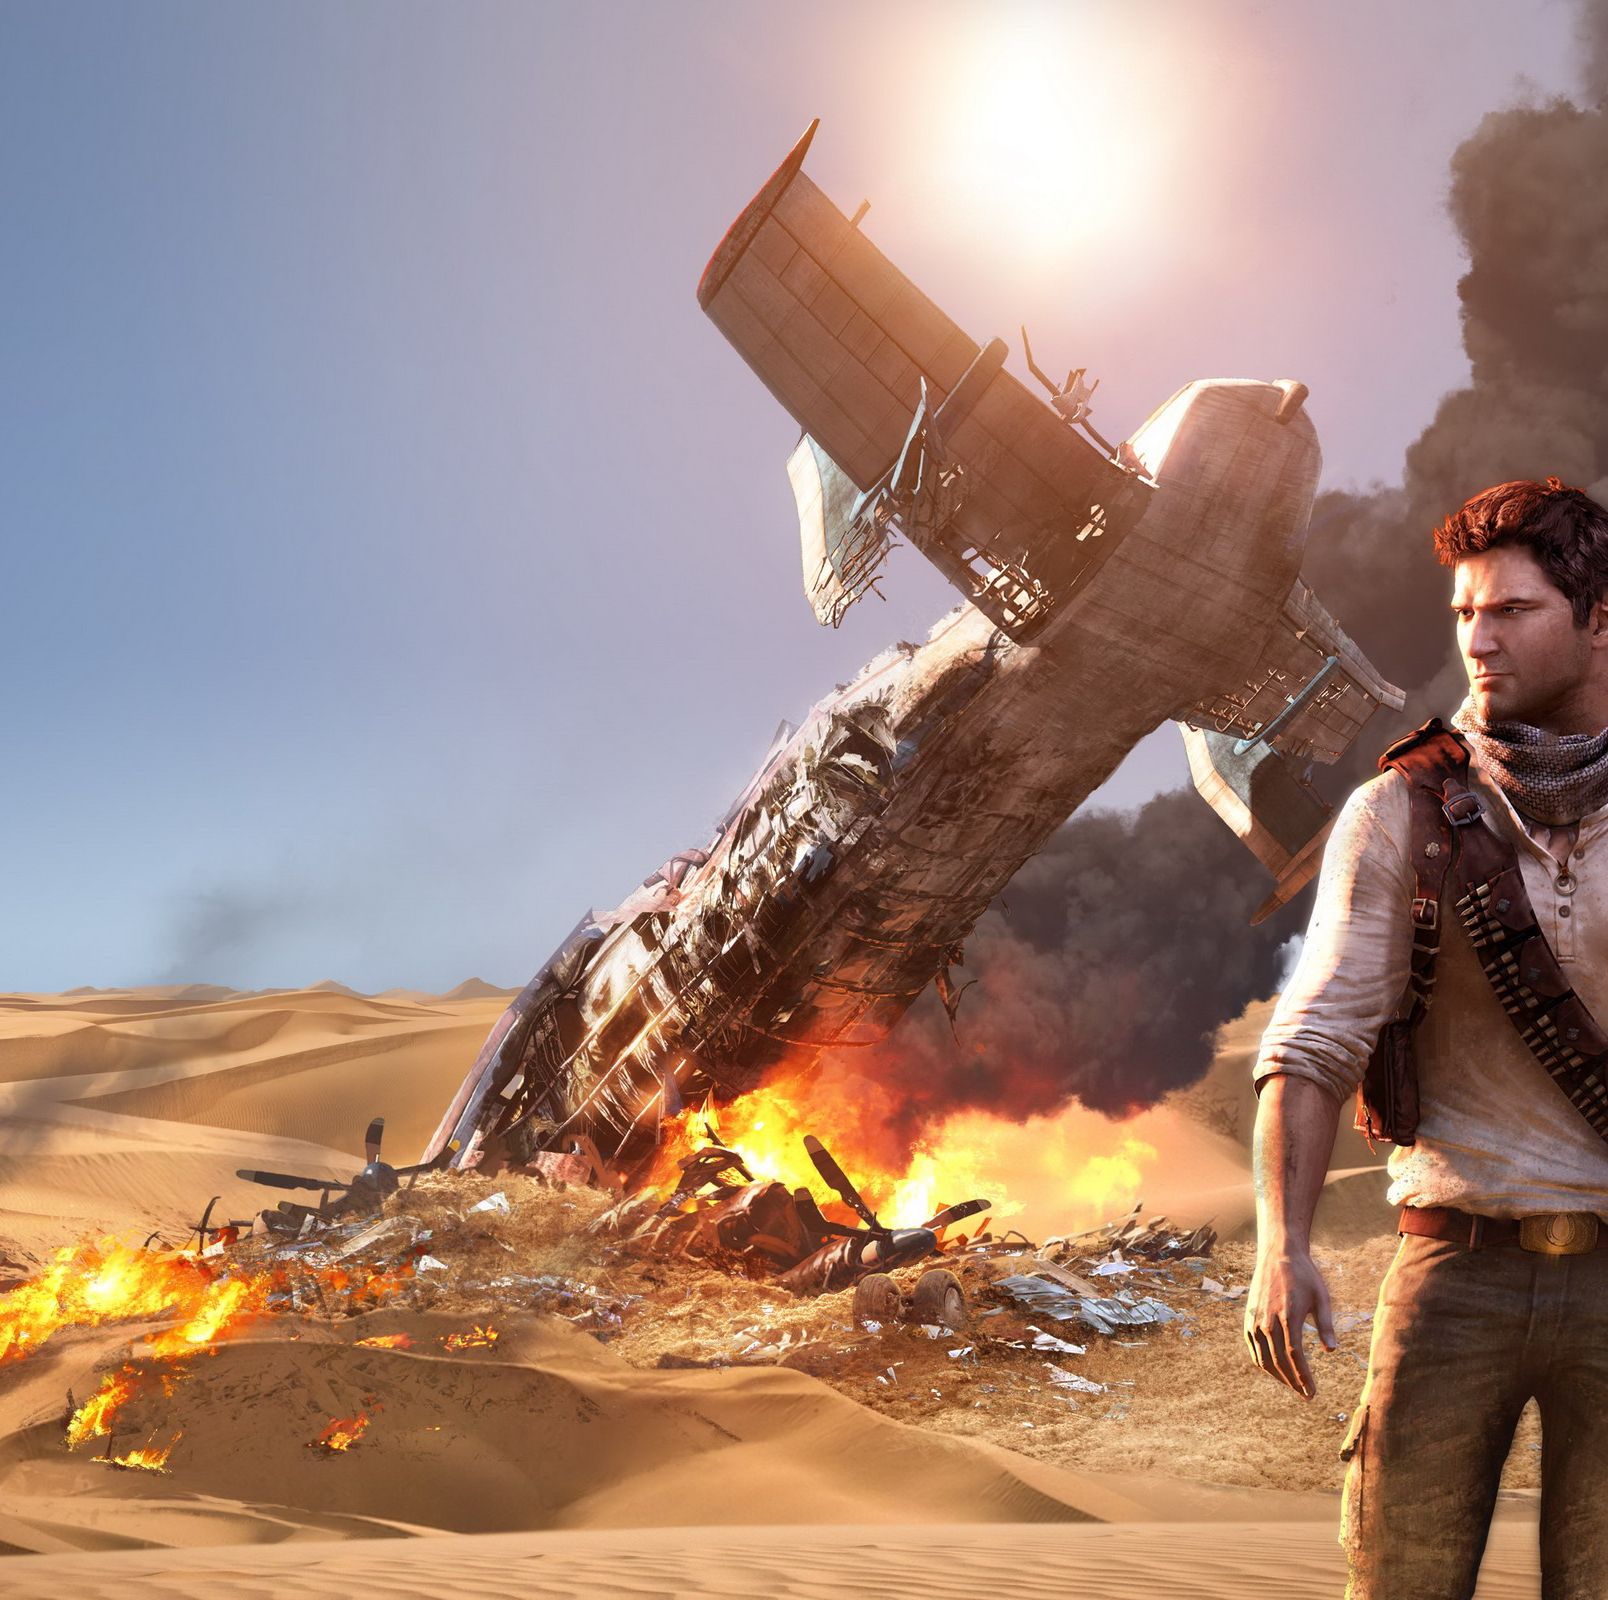 Naughty Dog discusses updating Nathan Drake in Uncharted 4